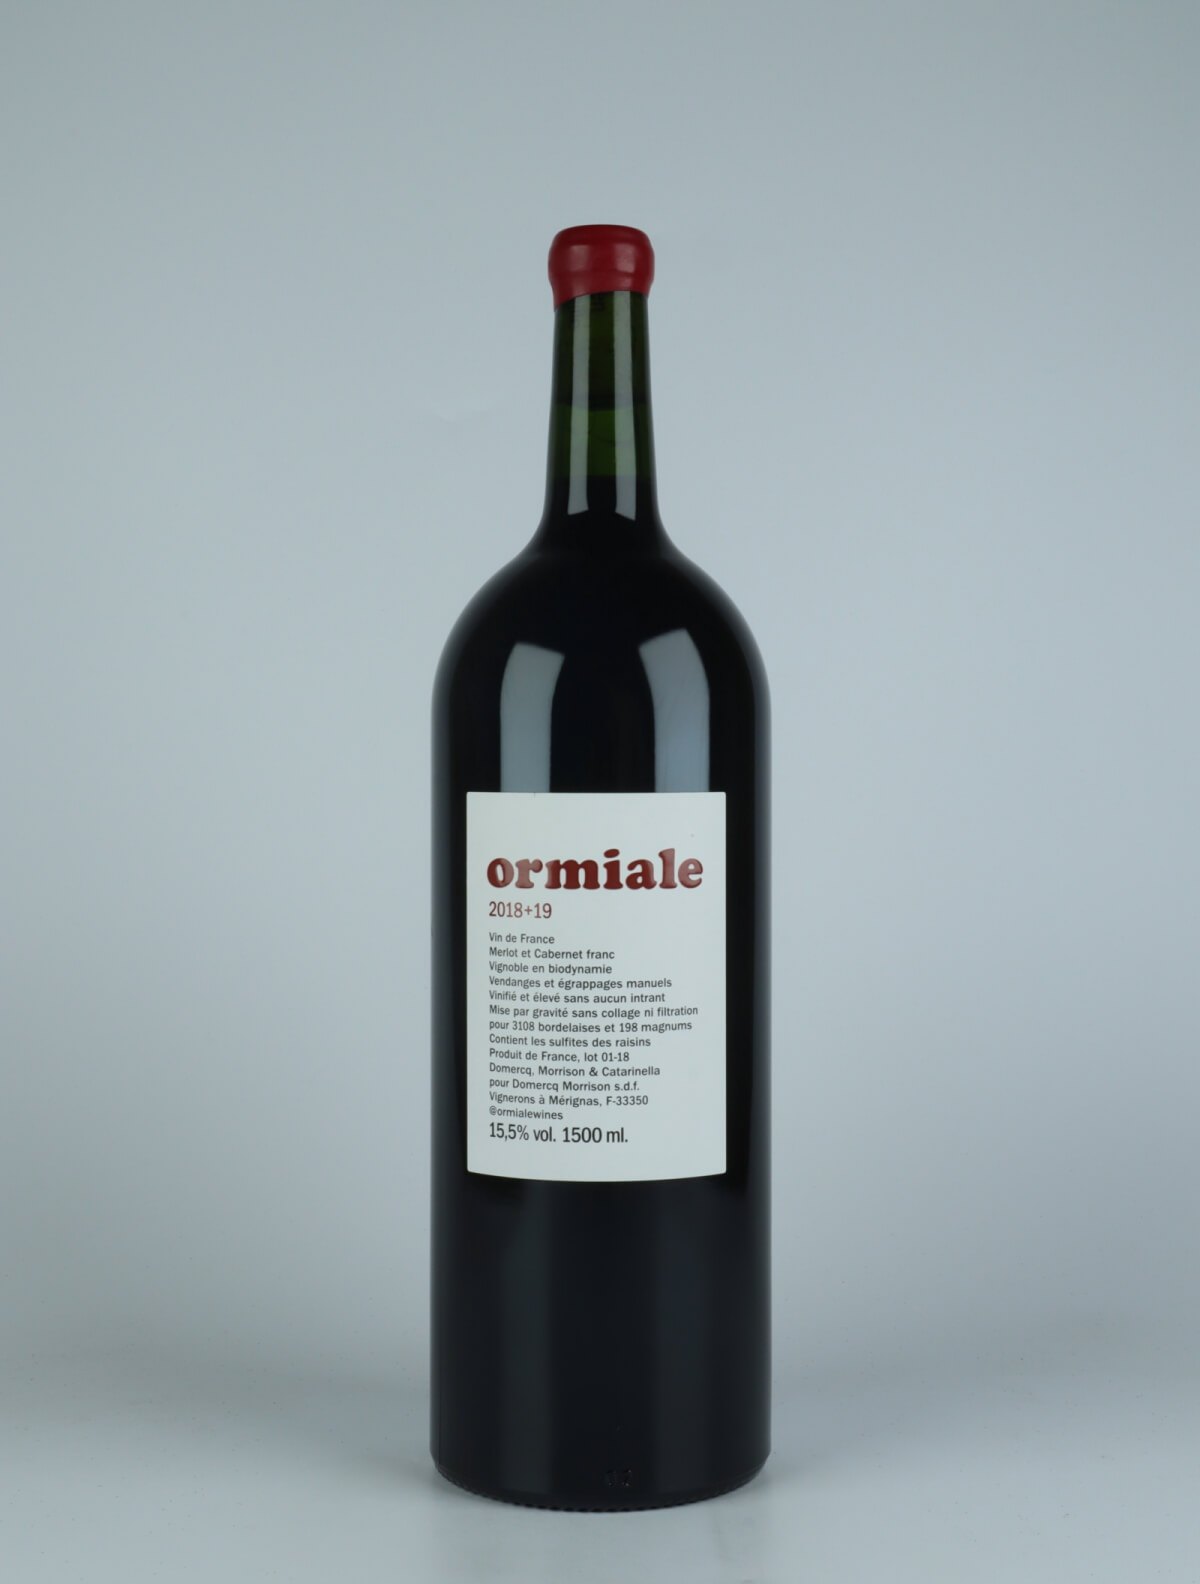 A bottle N.V. Ormiale (18+19) Red wine from Ormiale, Bordeaux in France